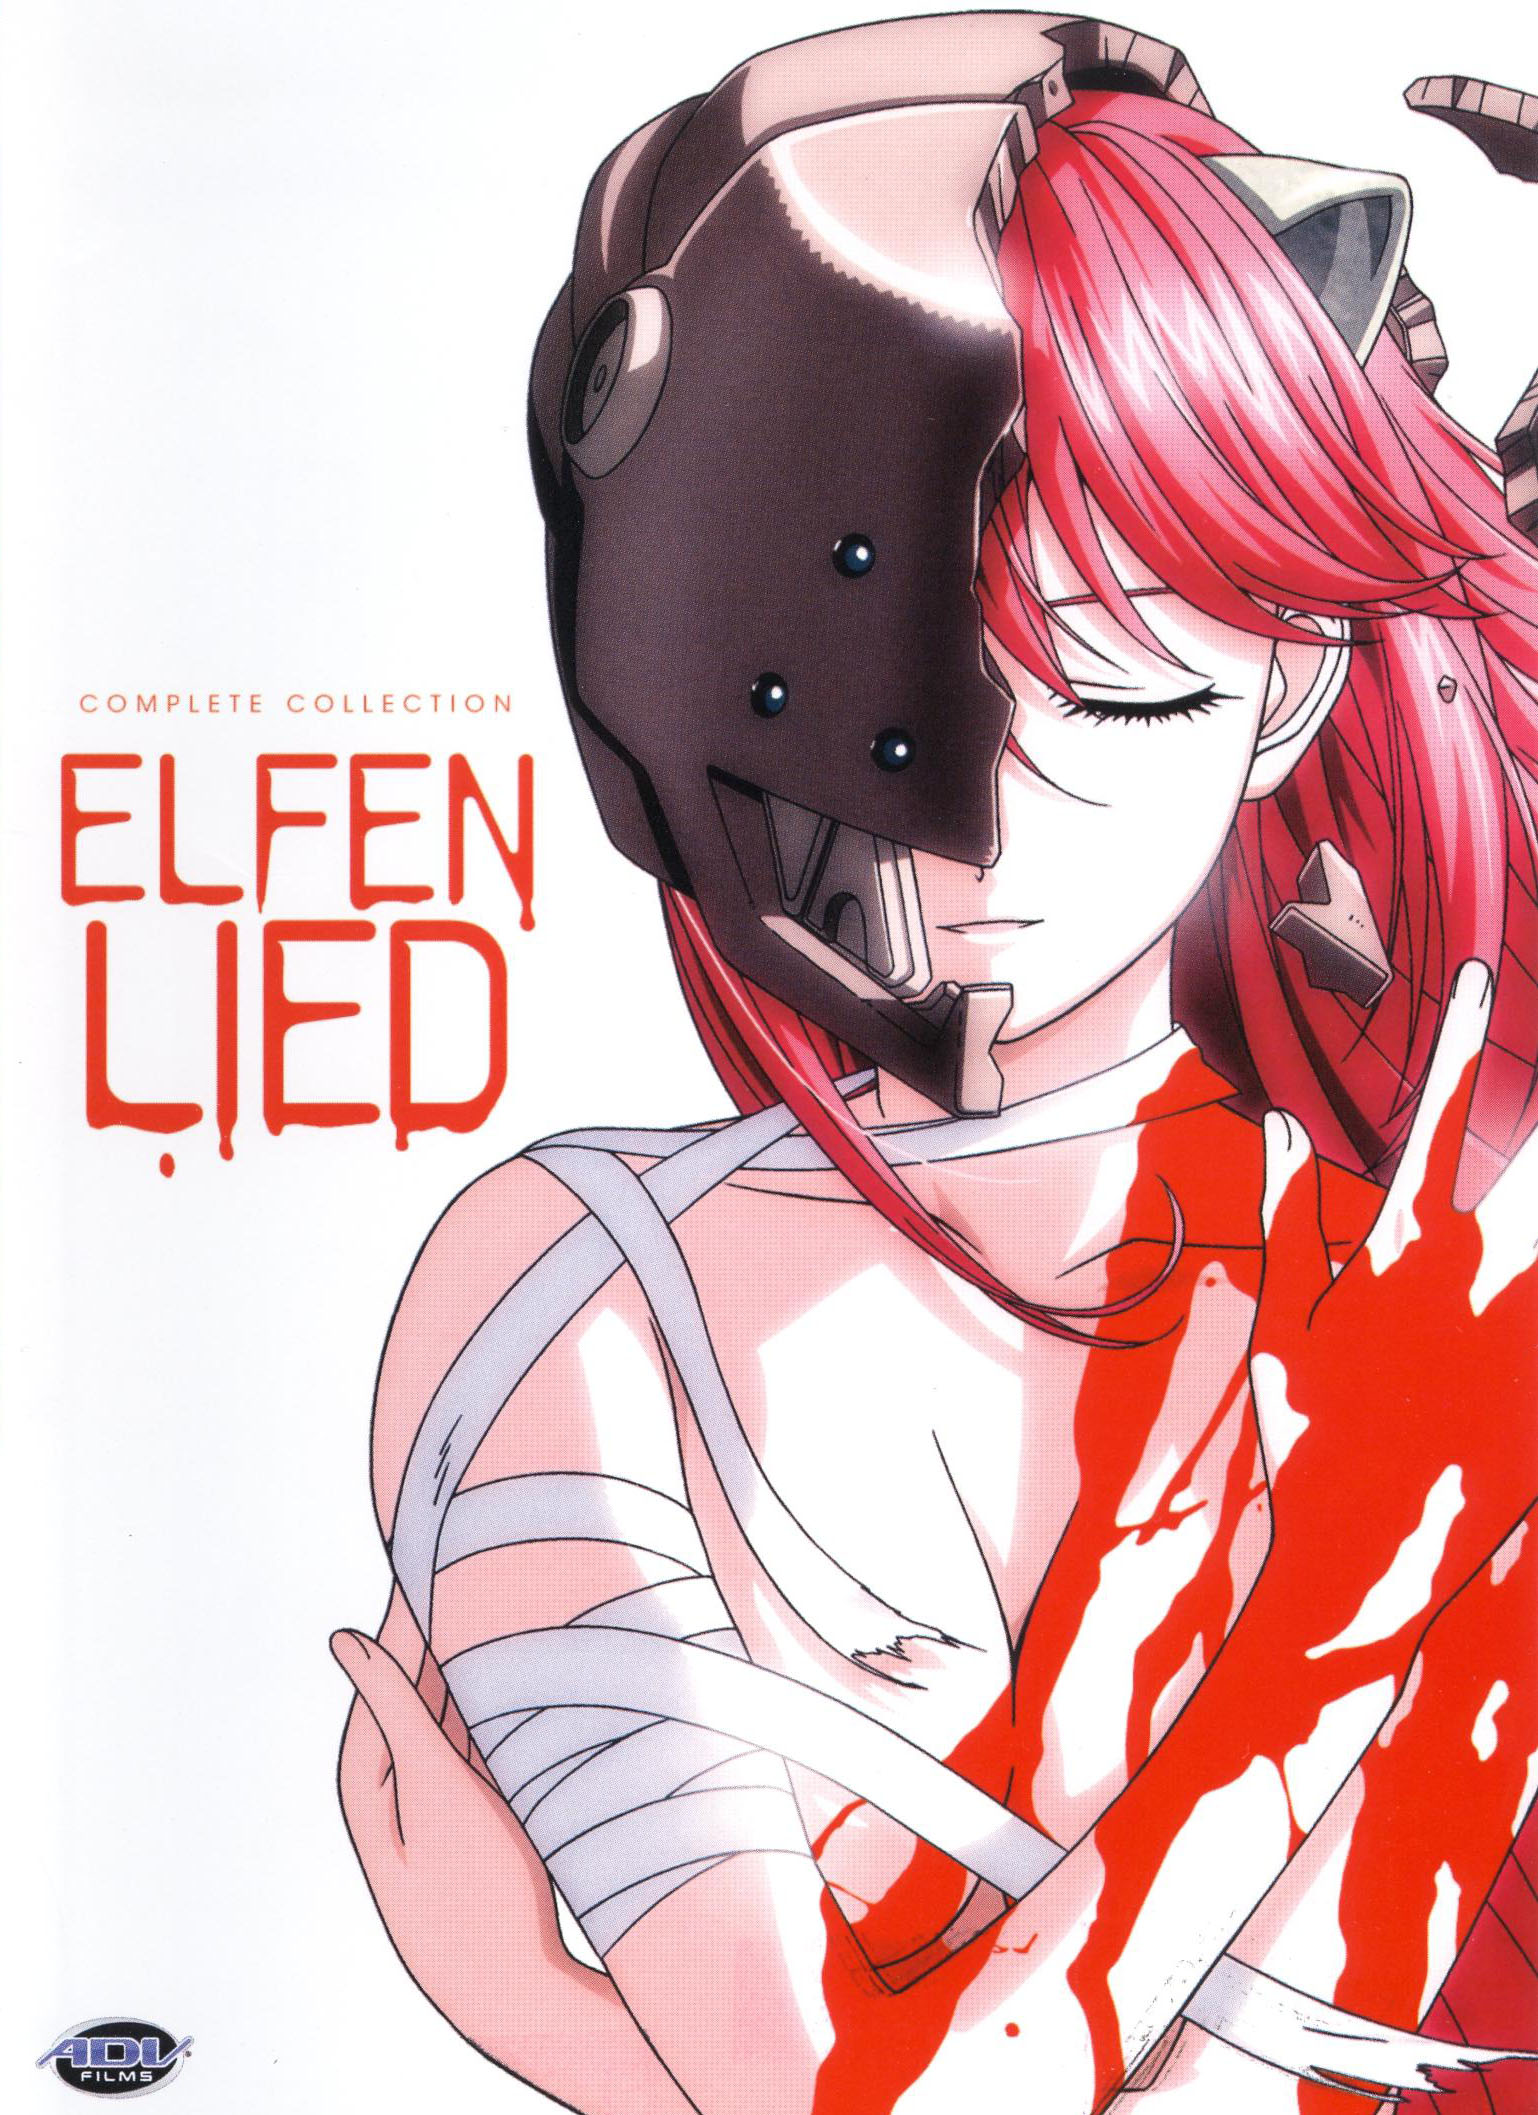 Elfen Lied: Complete Collection [Blu-ray] [Import] rdzdsi3